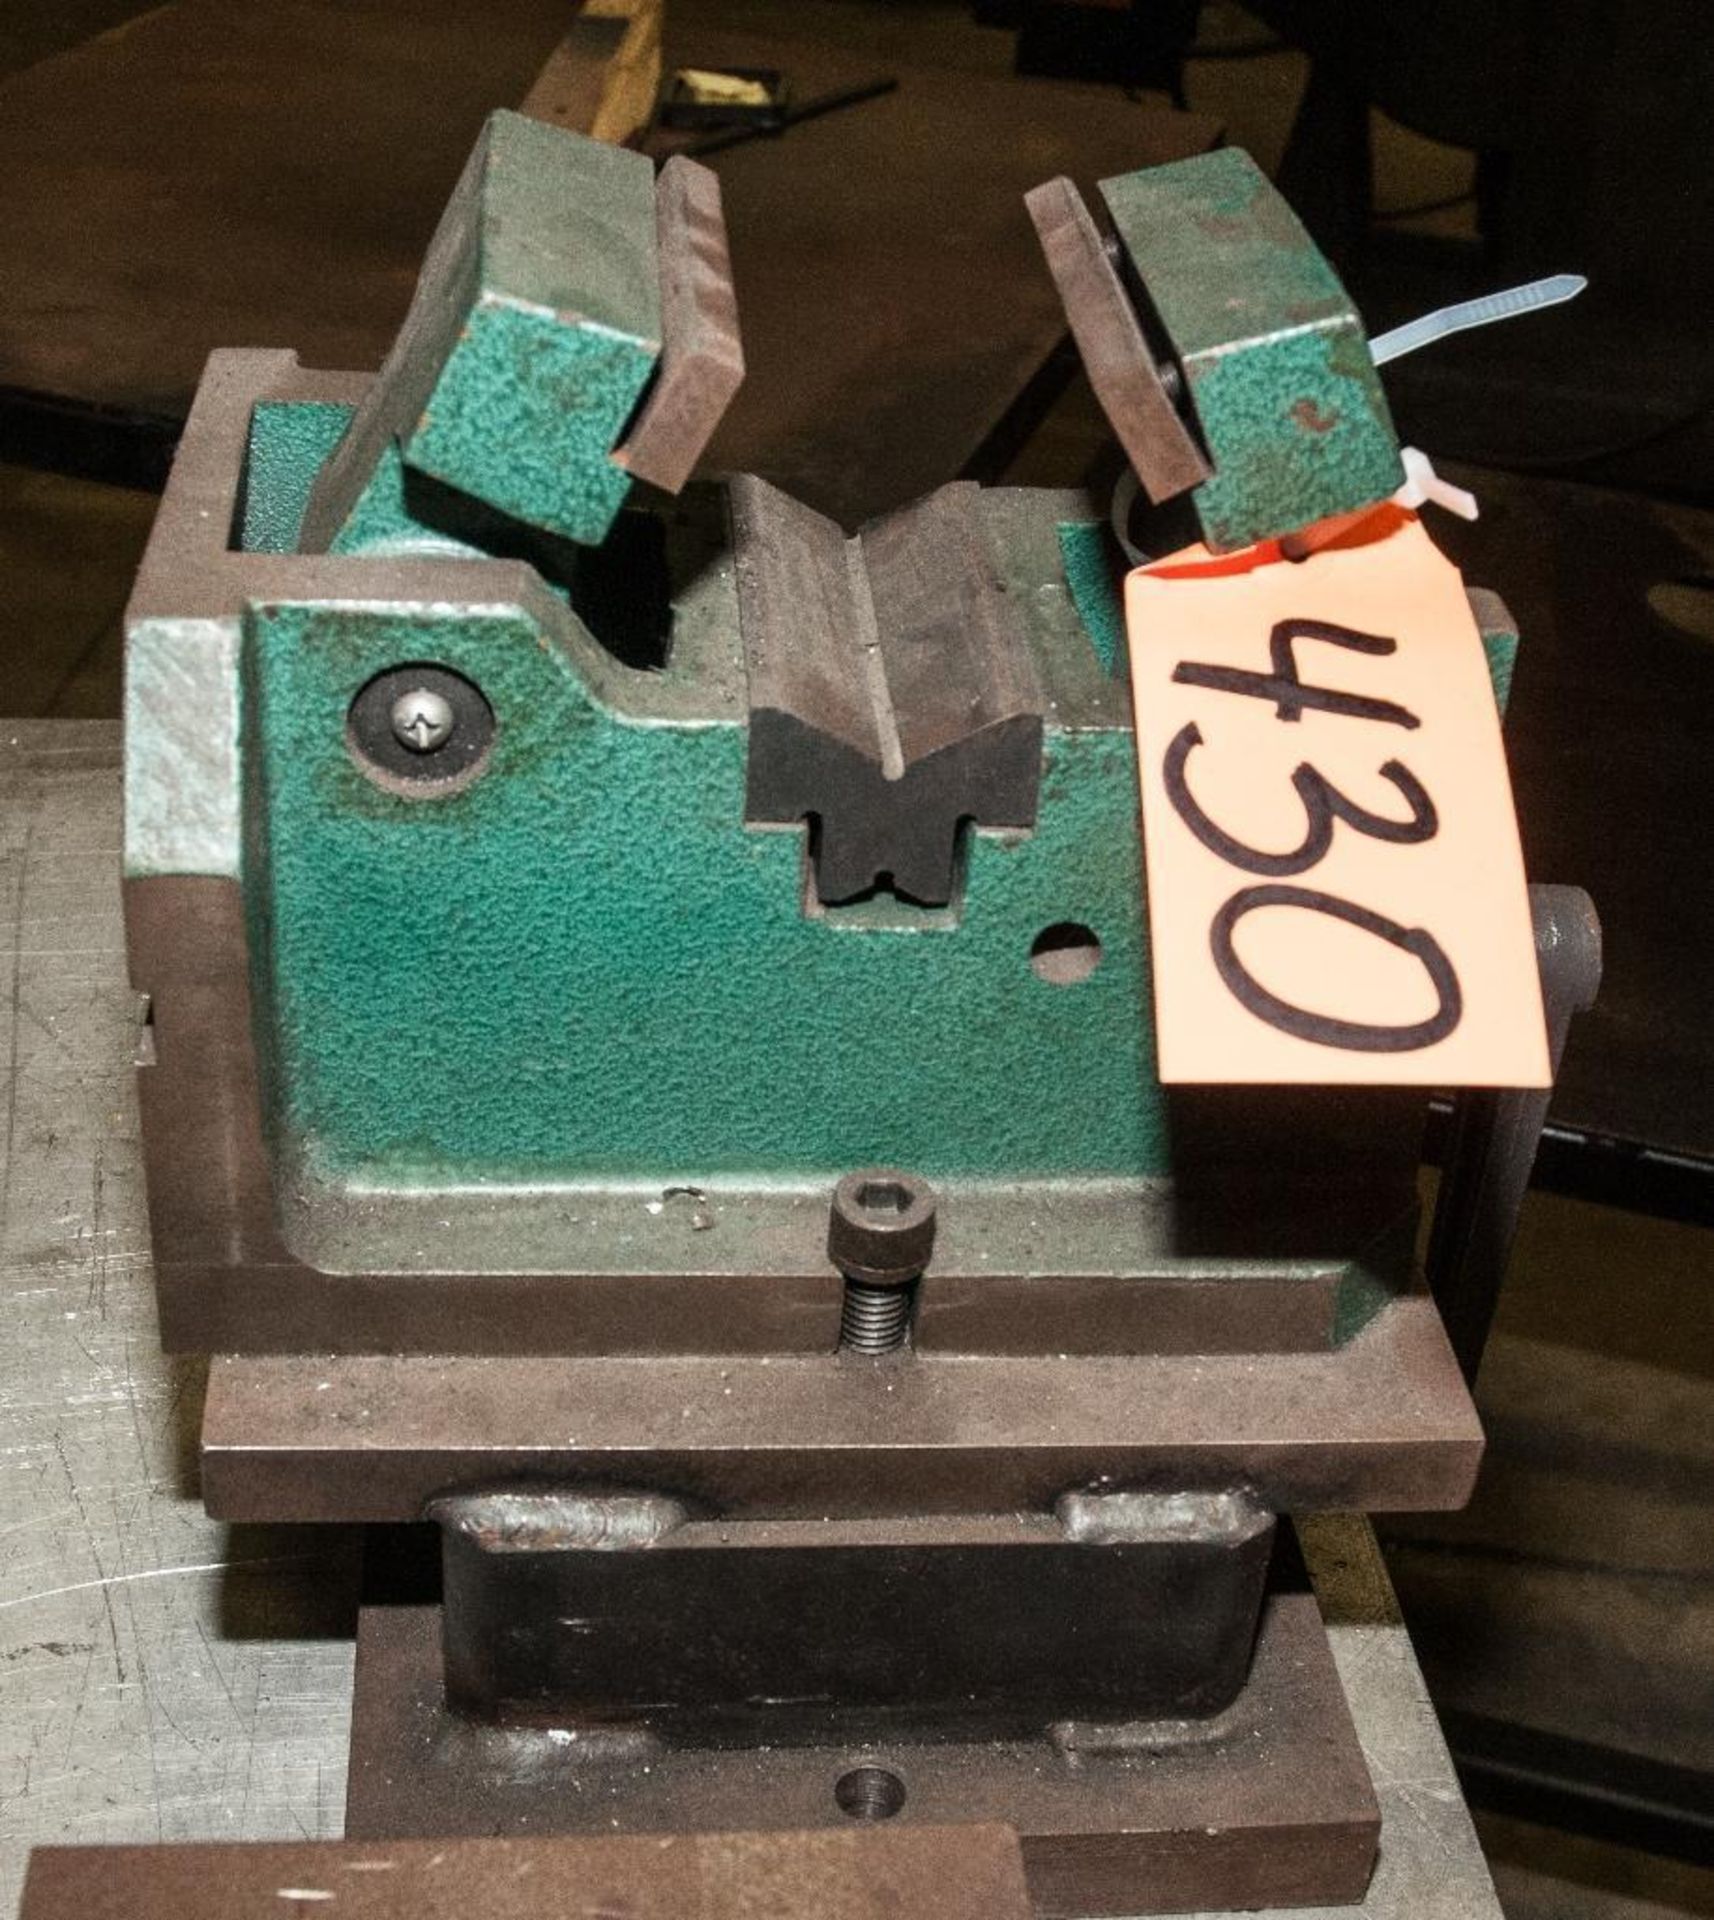 Shars Vise for round stock/pipe, LOCATED-United Tool N27 W23591 Paul Road Pewaukee, WI 53072